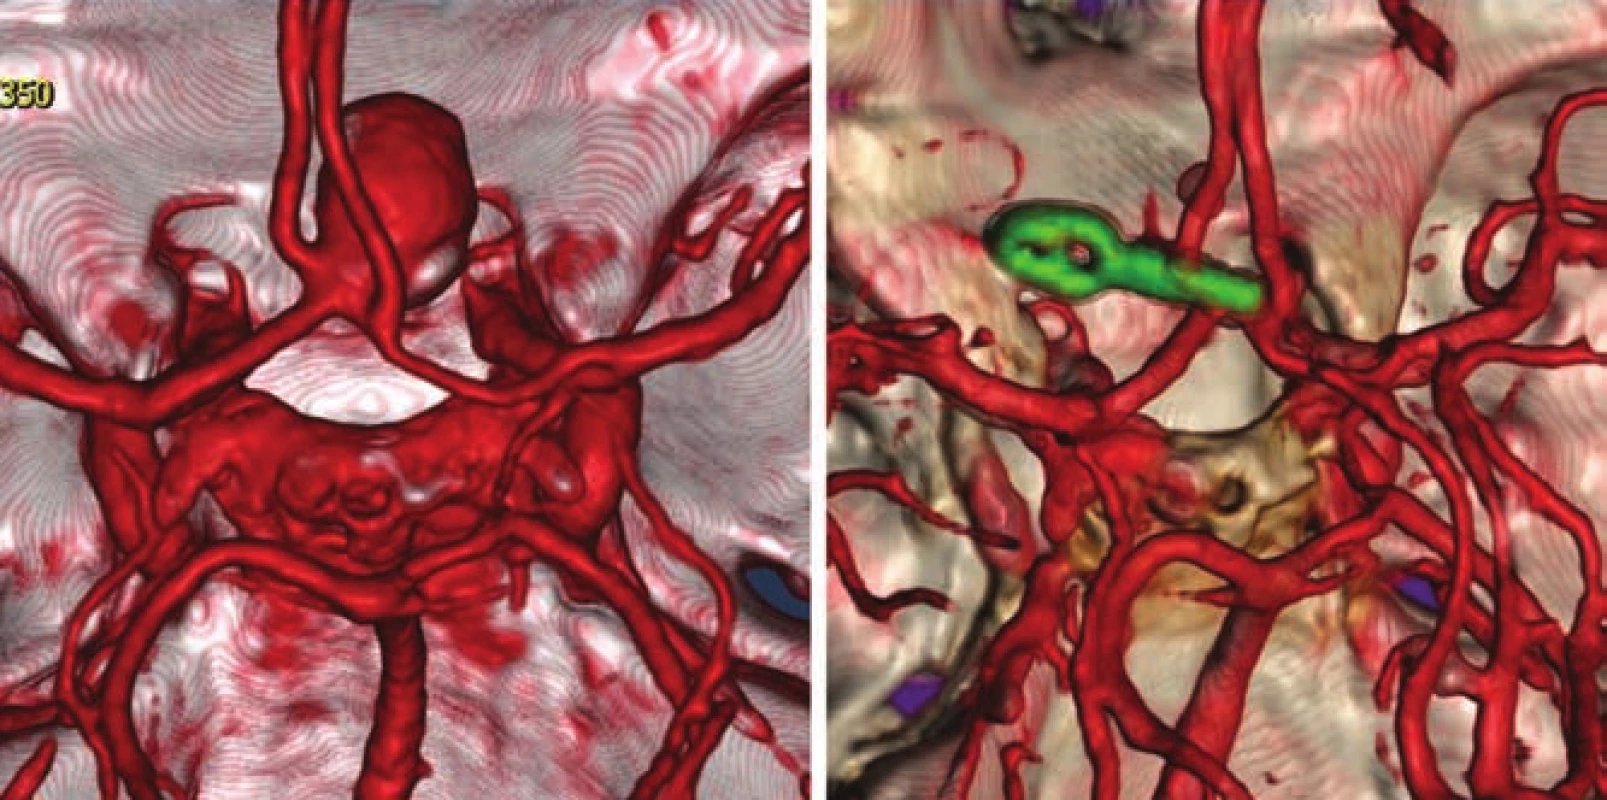 CTA of the anterior communicating artery aneurysm before and after clipping.